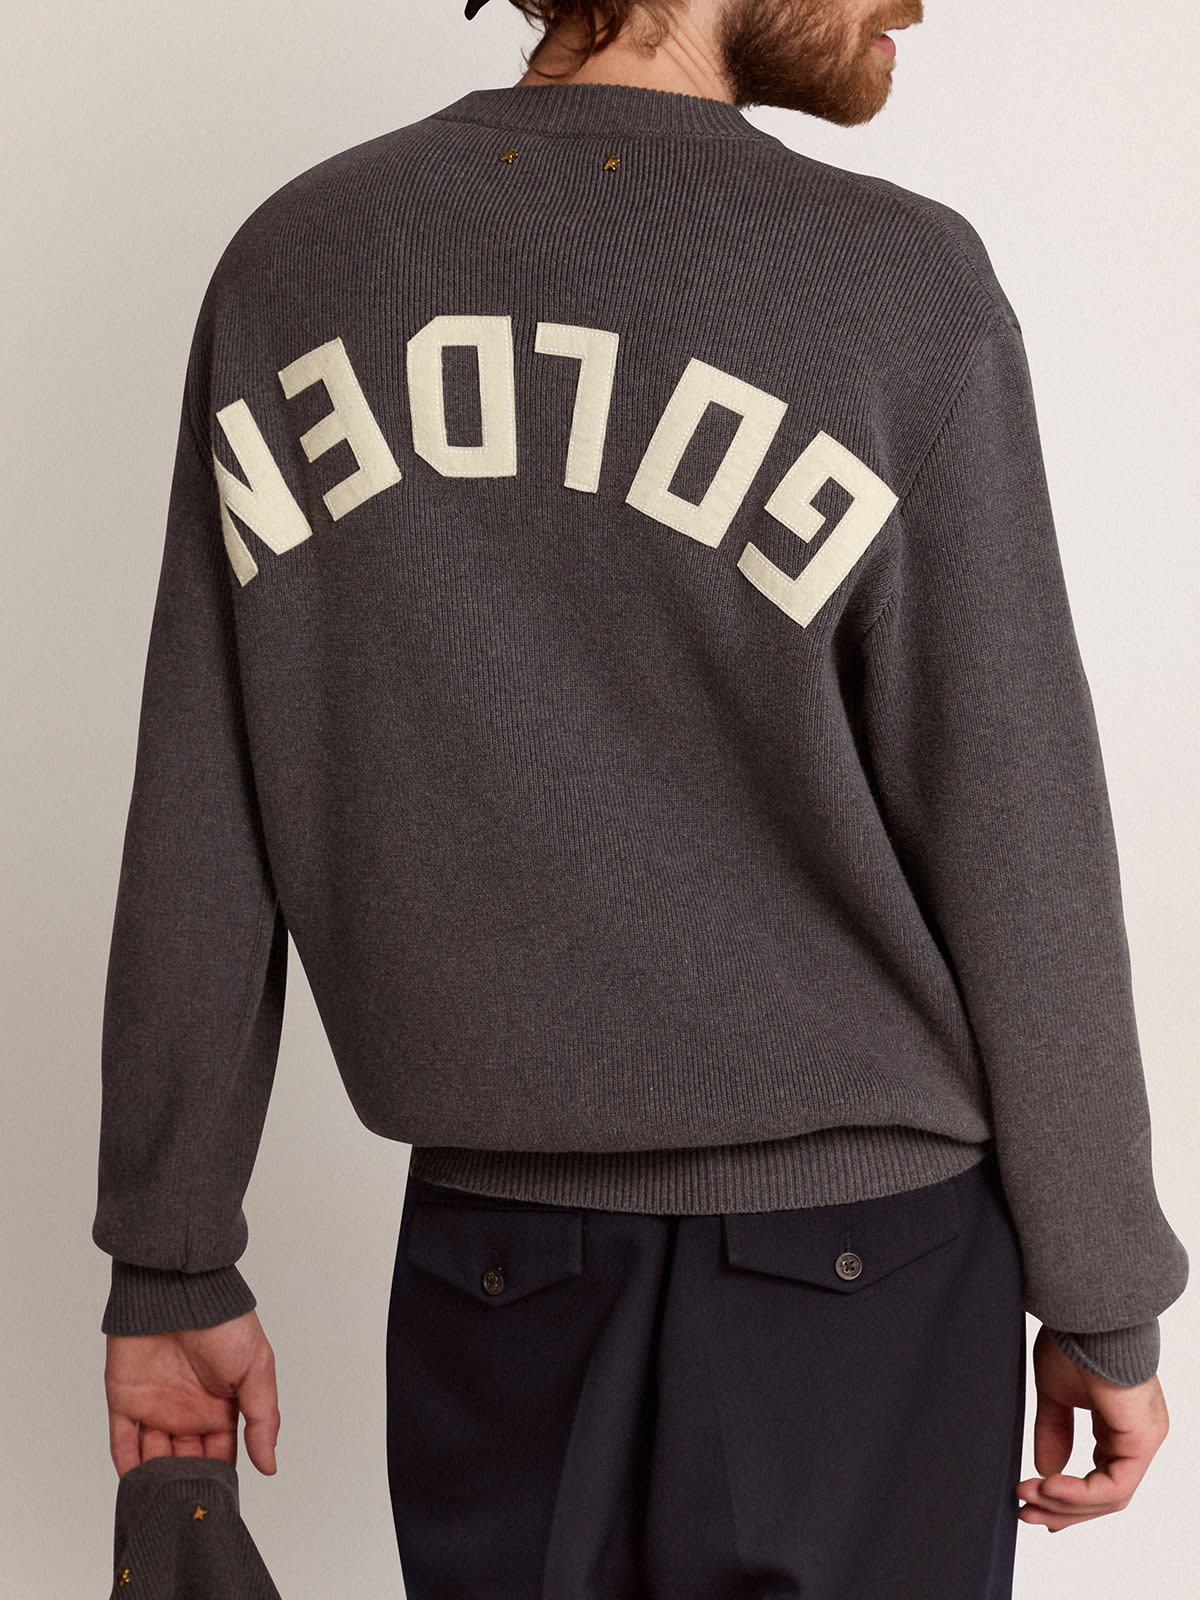 Golden Goose - Men's round-neck sweater in dark gray cotton with logo on the back in 